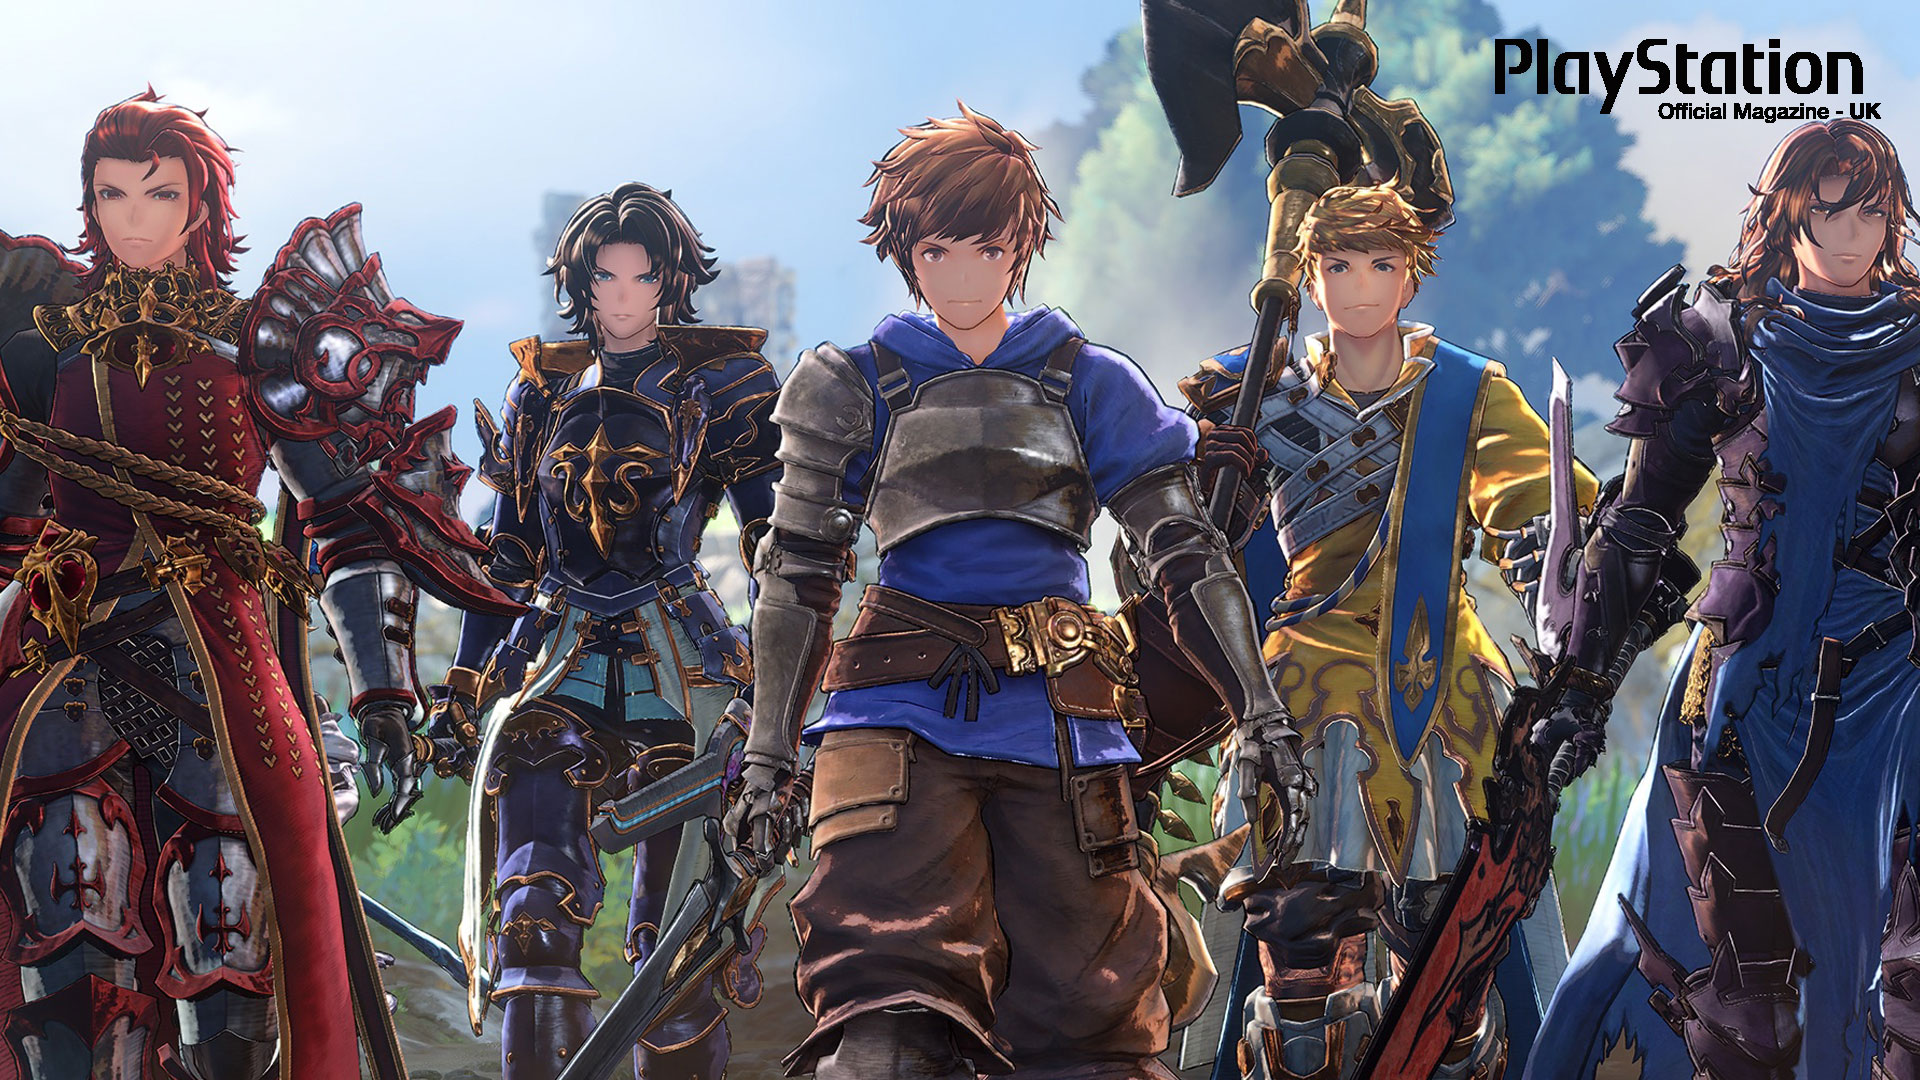 Granblue Fantasy: Relink brings online co-op to one of the most popular JRPG franchises of all time